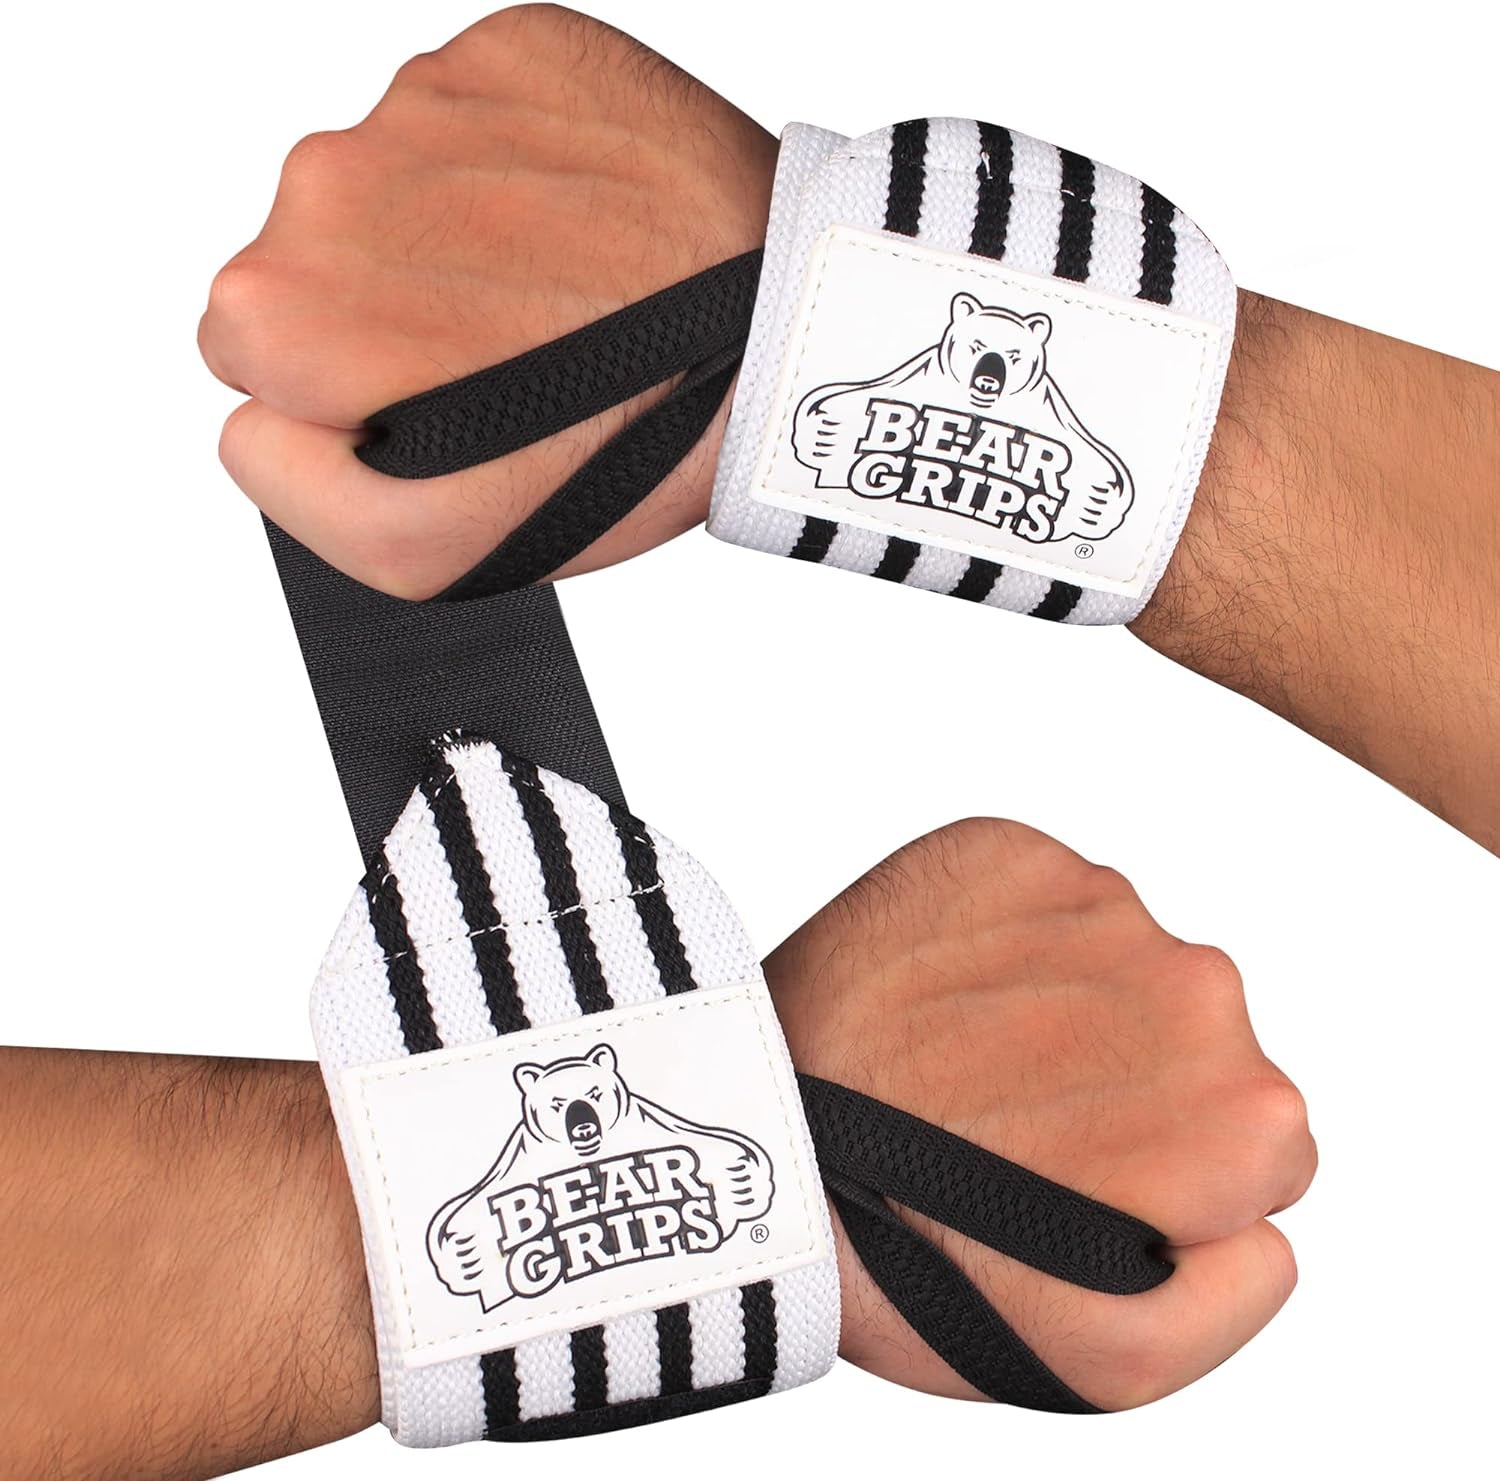 Wrist Wraps for Weightlifting | Weight Lifting Wrist Straps for Weightlifting | Extra Strength Gym Wrist Wraps | Two Wrist Wrap per Pack | 12” & 18” | Lifting Wrist Wraps for Men & Women